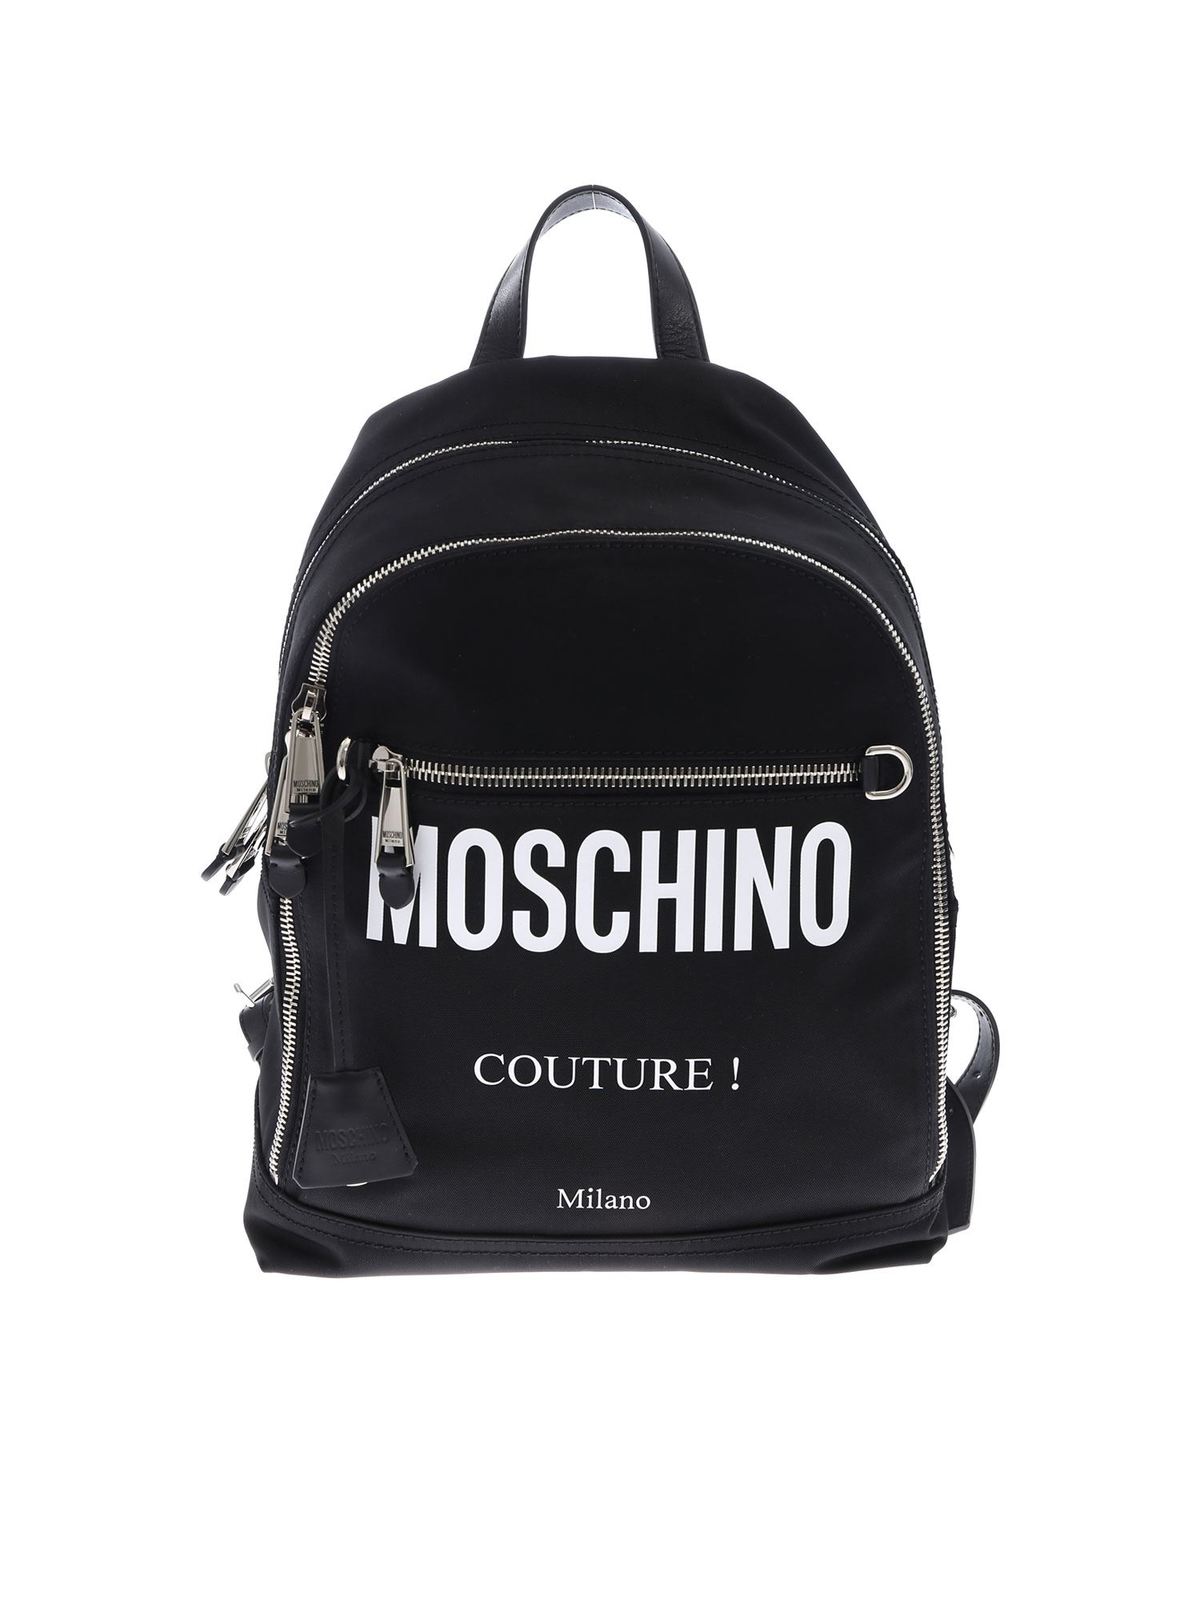 Moschino Couture Backpack In Black In Negro